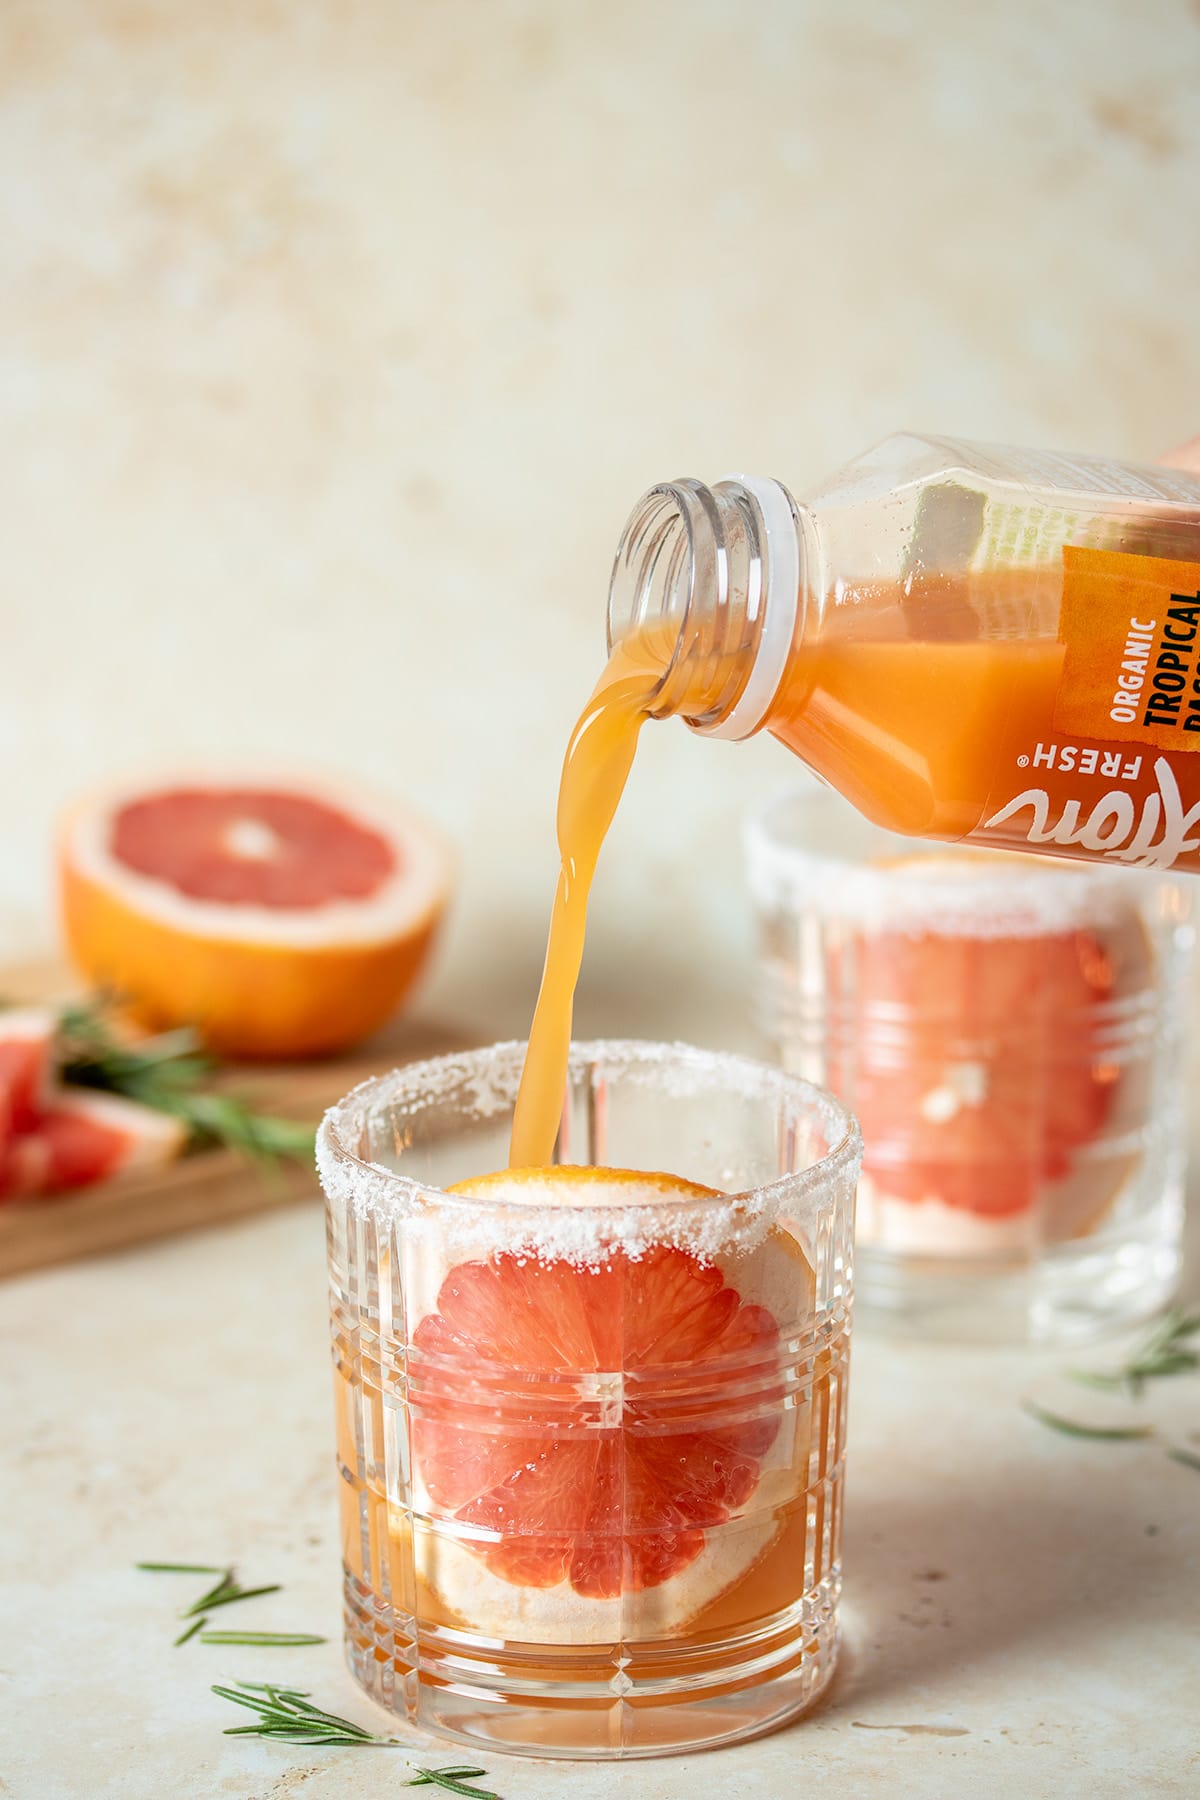 Clear bottle of juice pouring into a glass with a round grapefruit slice stuck to the front of it.